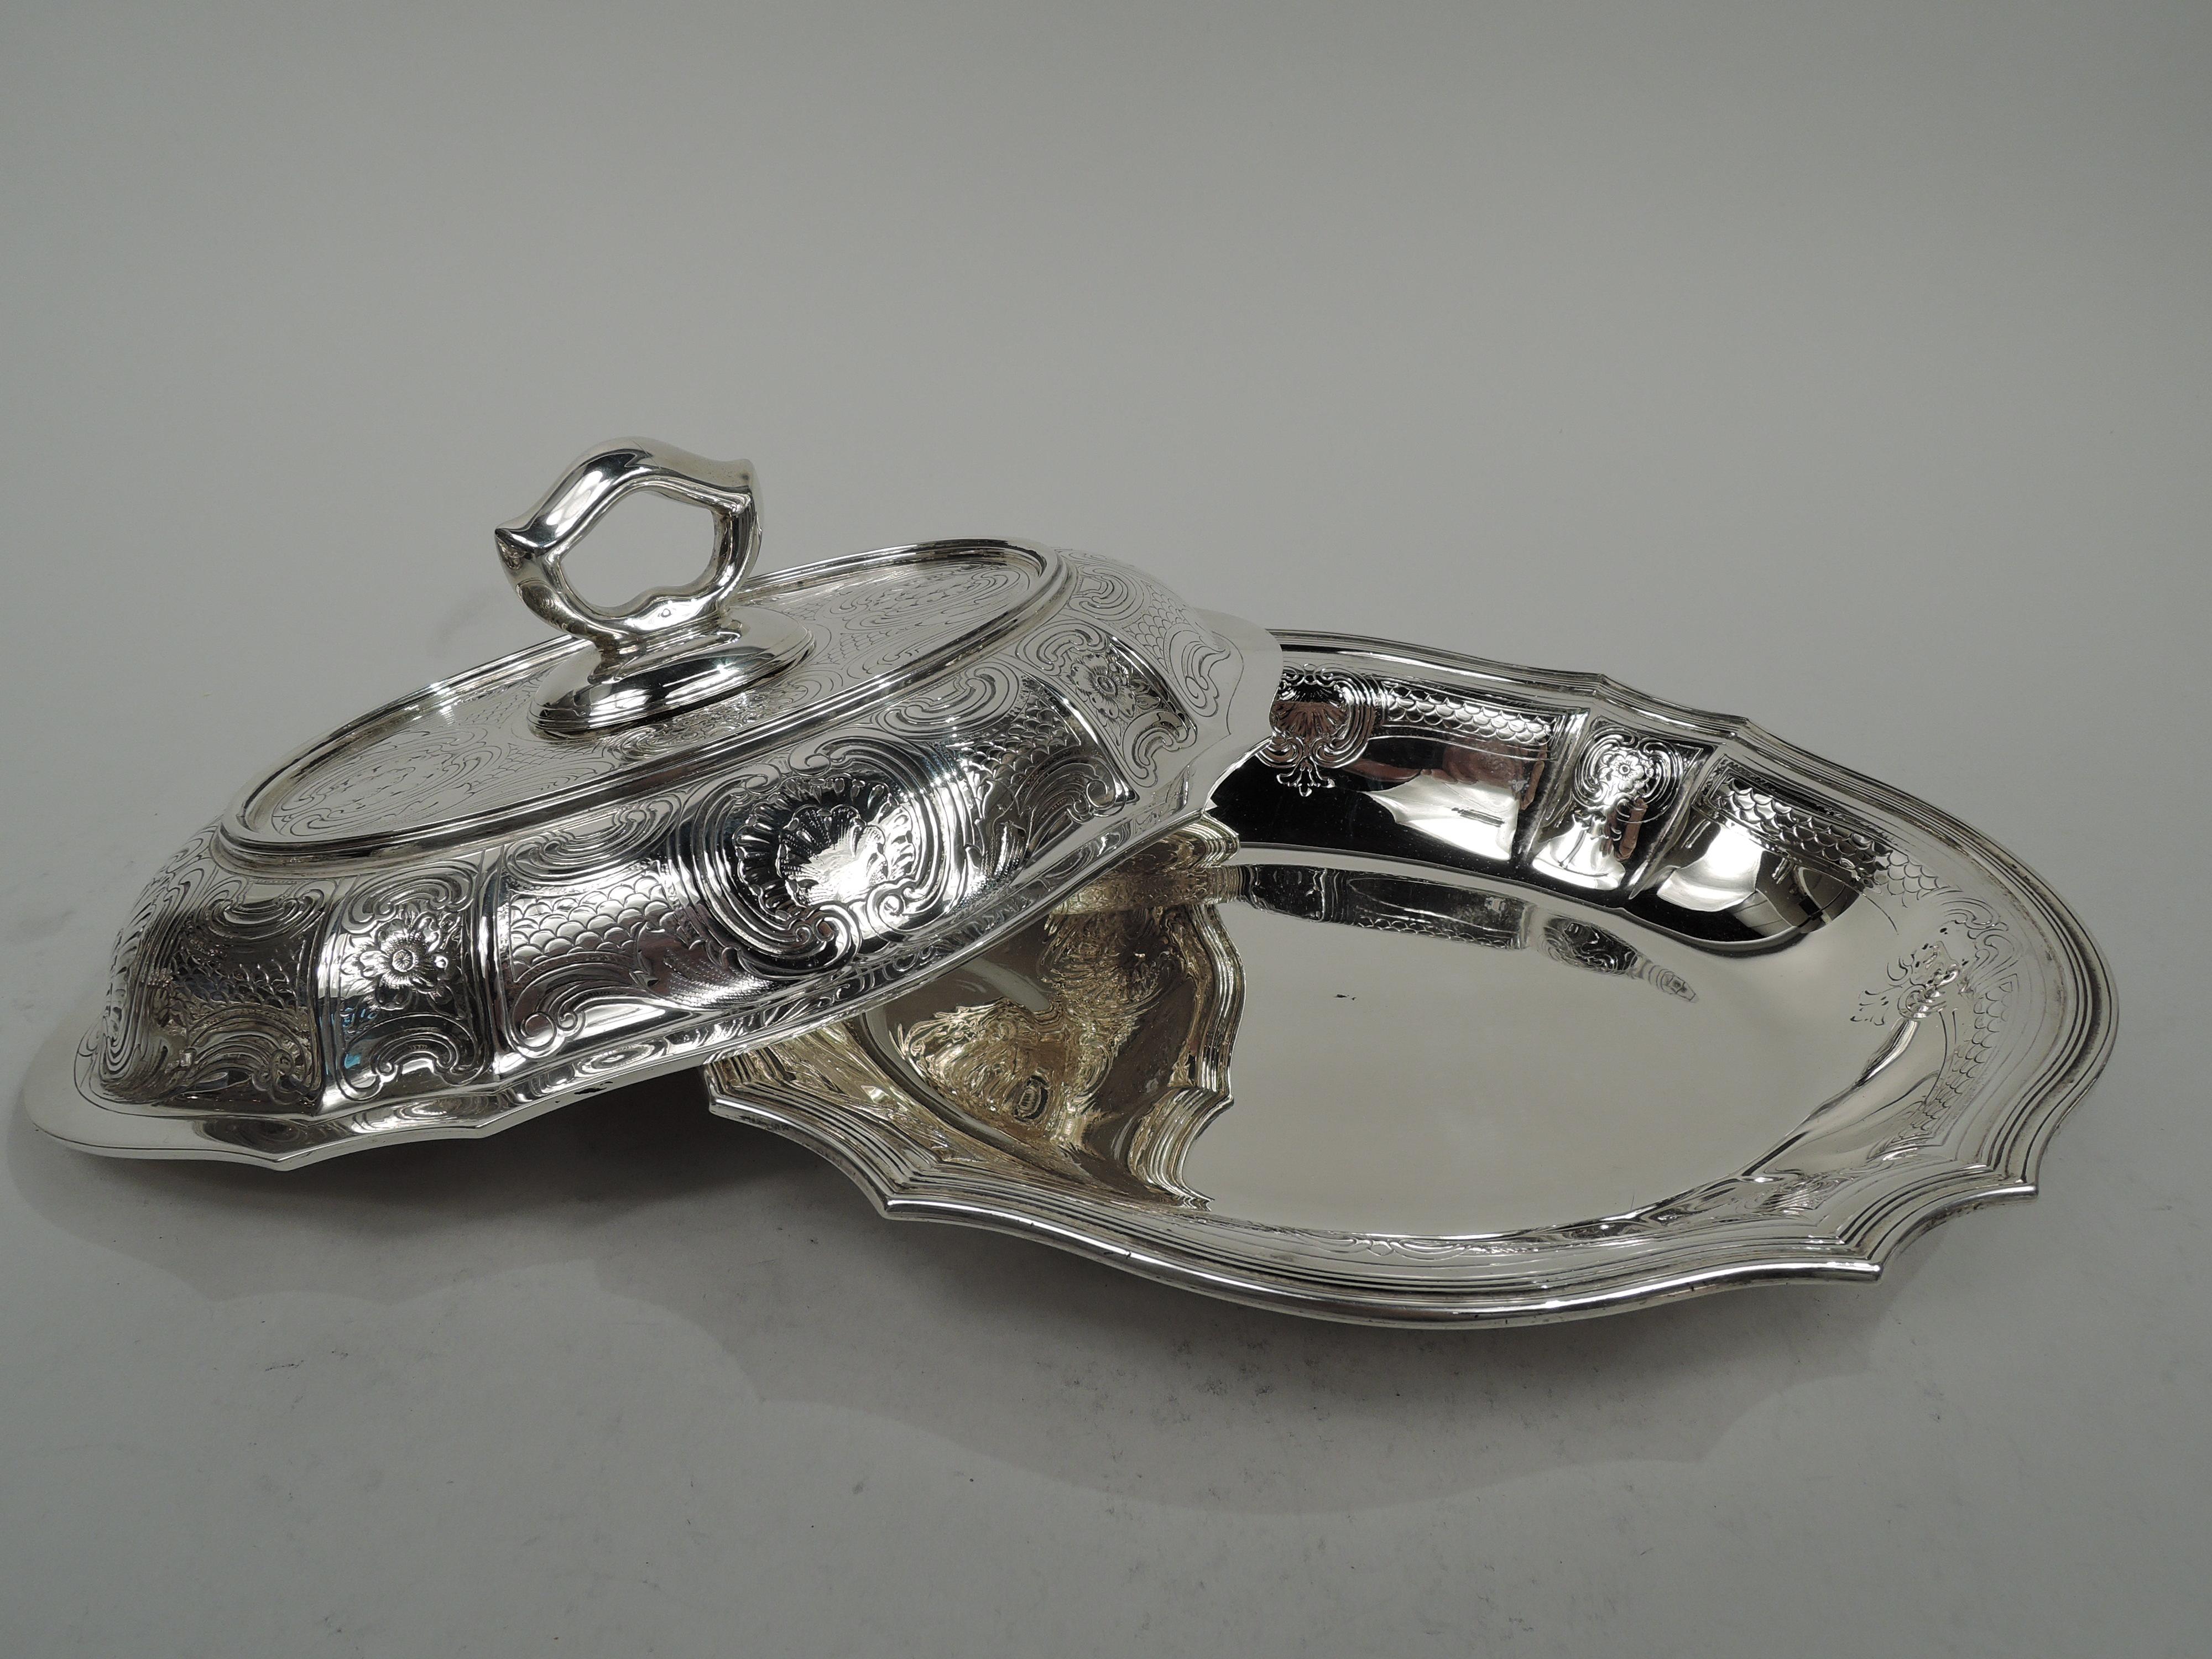 Tiffany Edwardian Modern Classical Sterling Silver Oval Serving Bowl In Excellent Condition For Sale In New York, NY